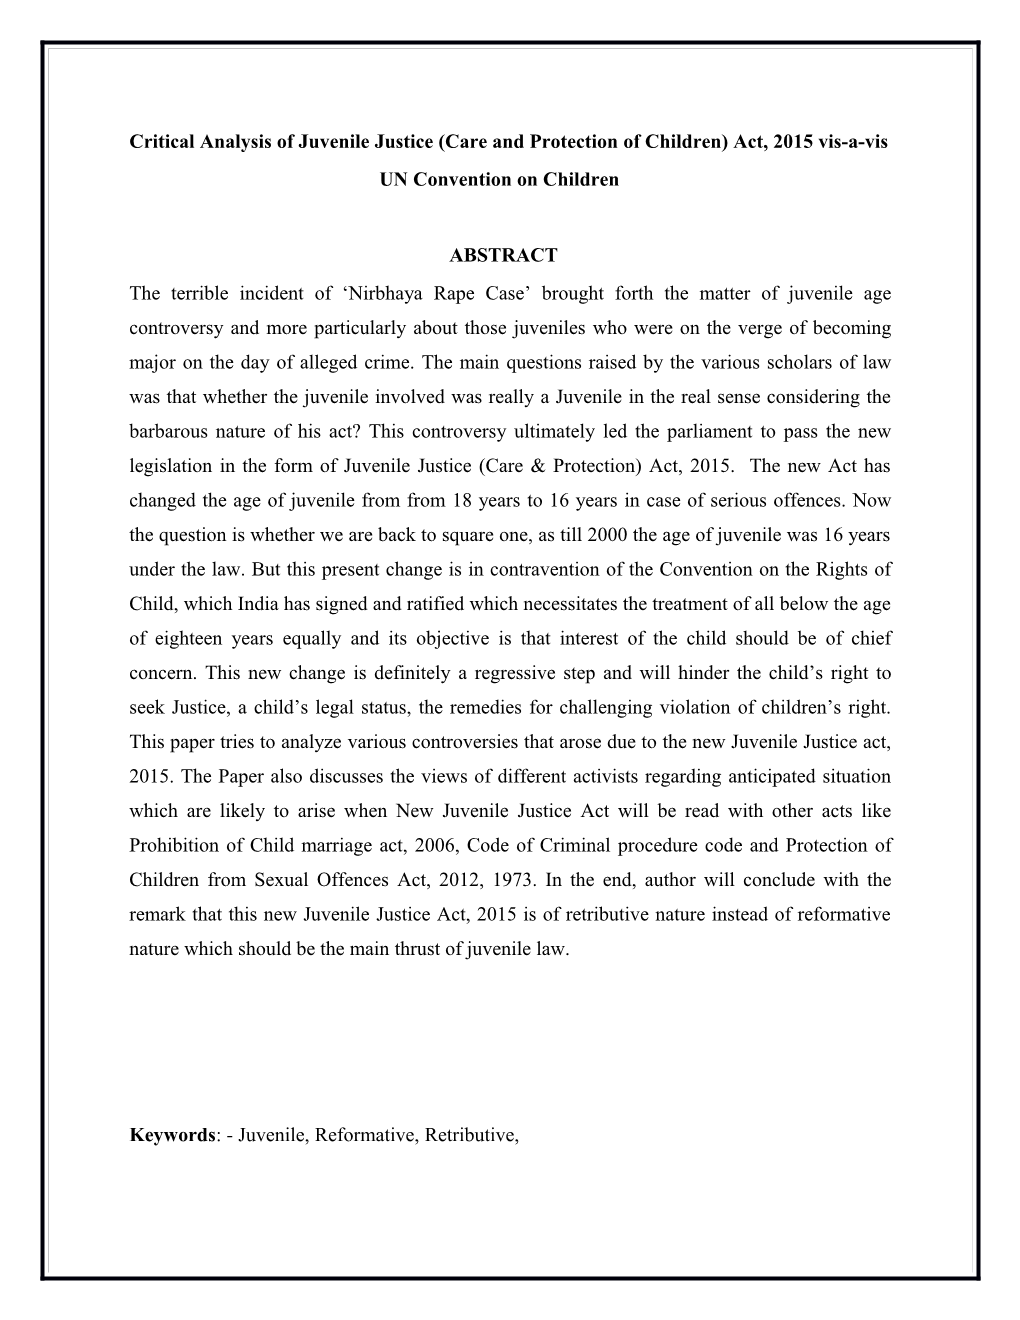 Critical Analysis of Juvenile Justice (Care and Protection of Children) Act, 2015 Vis-A-Vis